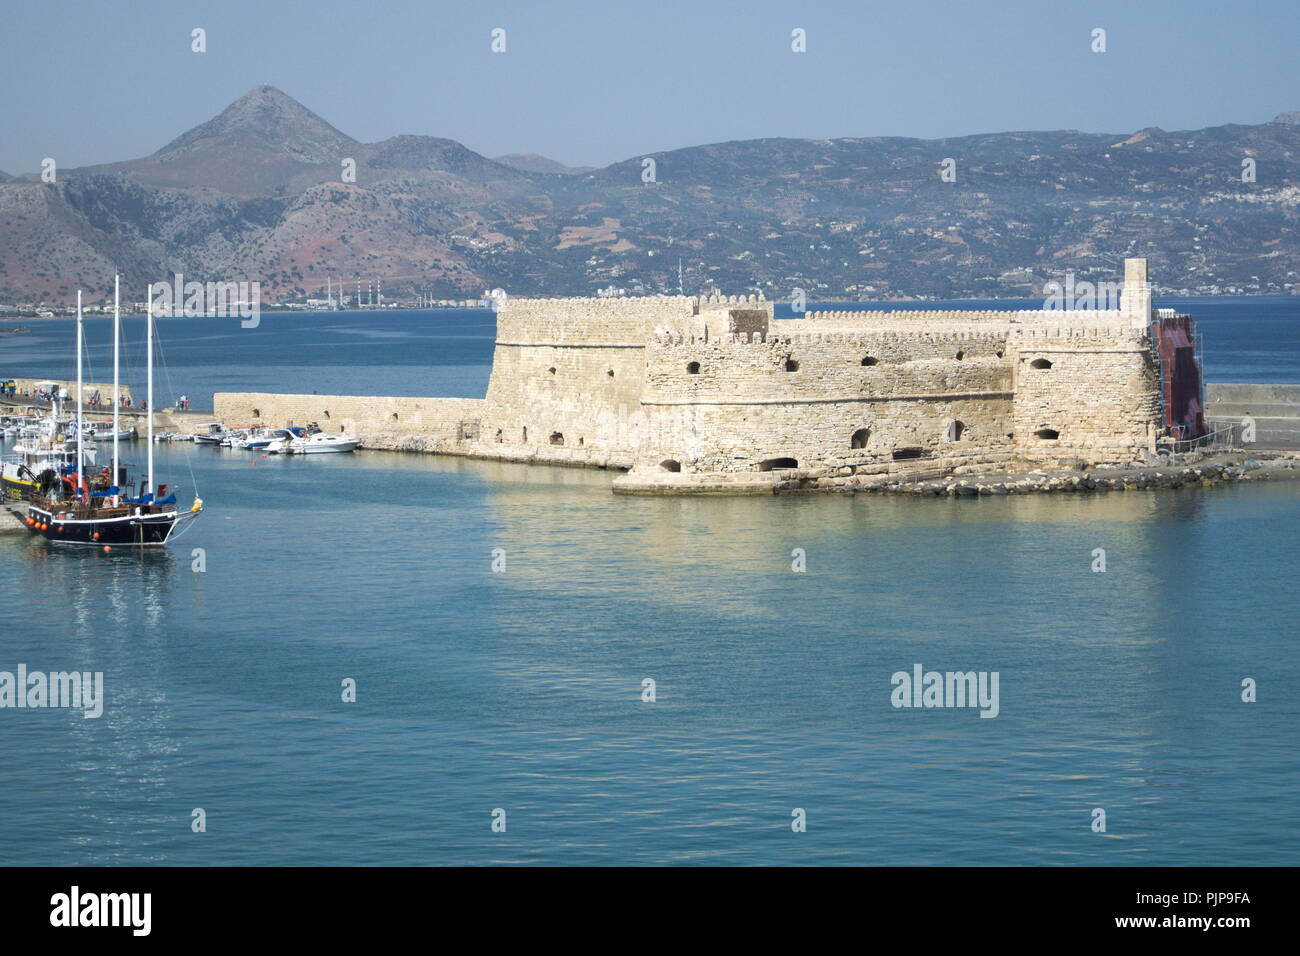 Greece, the beautiful island of Crete.  The Venetian Koules fortress at the entrance to the harbour. Stock Photo